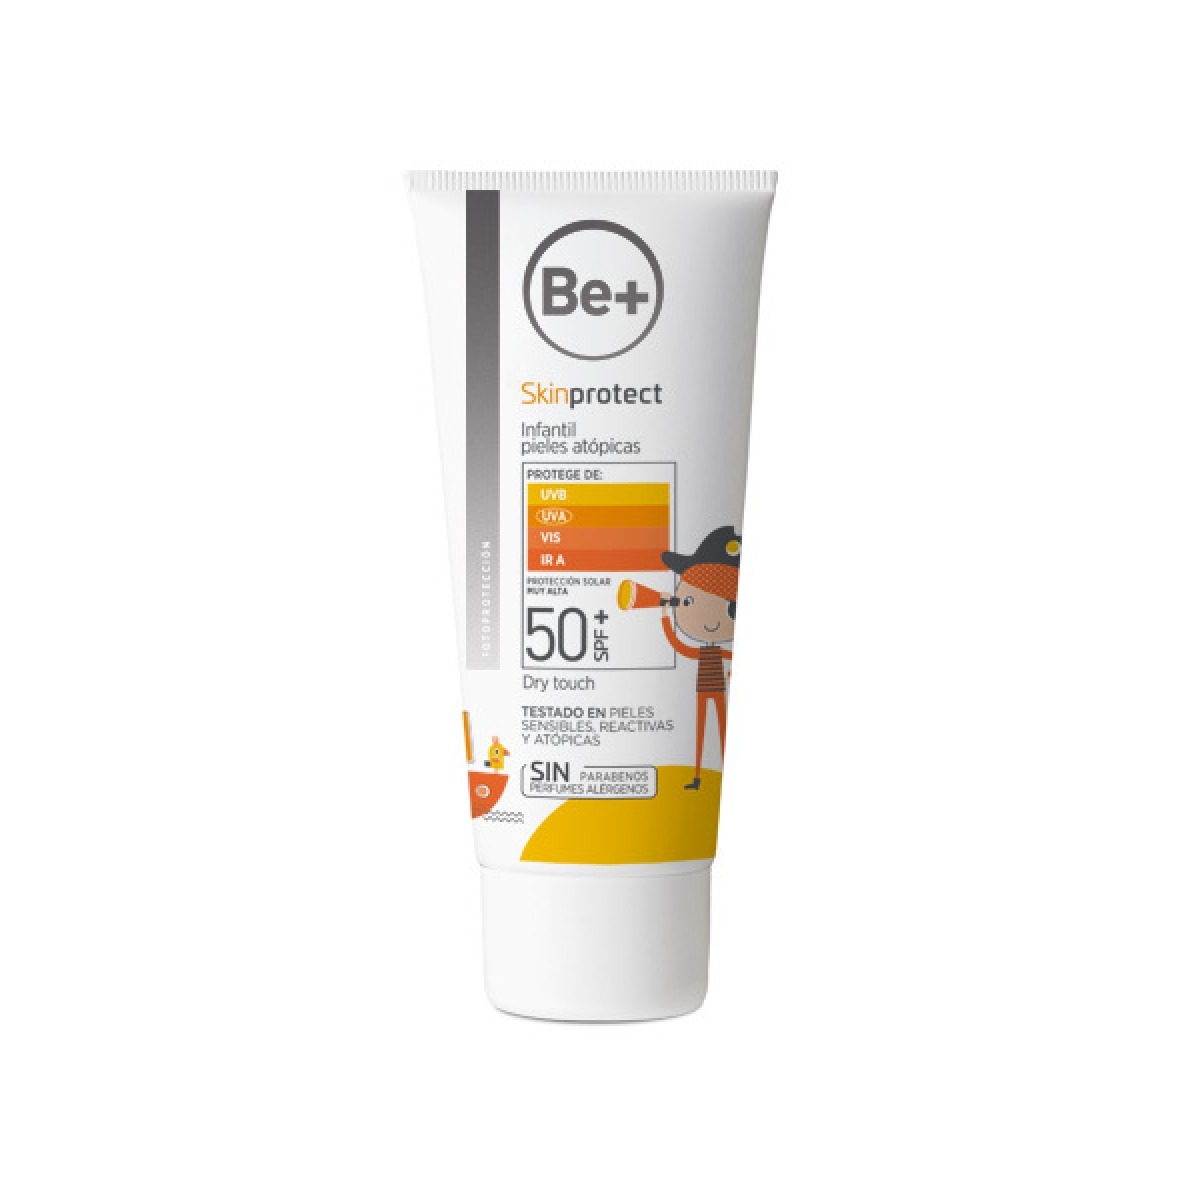 3D SKIN PROTECT DRY TOUCH INFANTIL SPF50 468x600